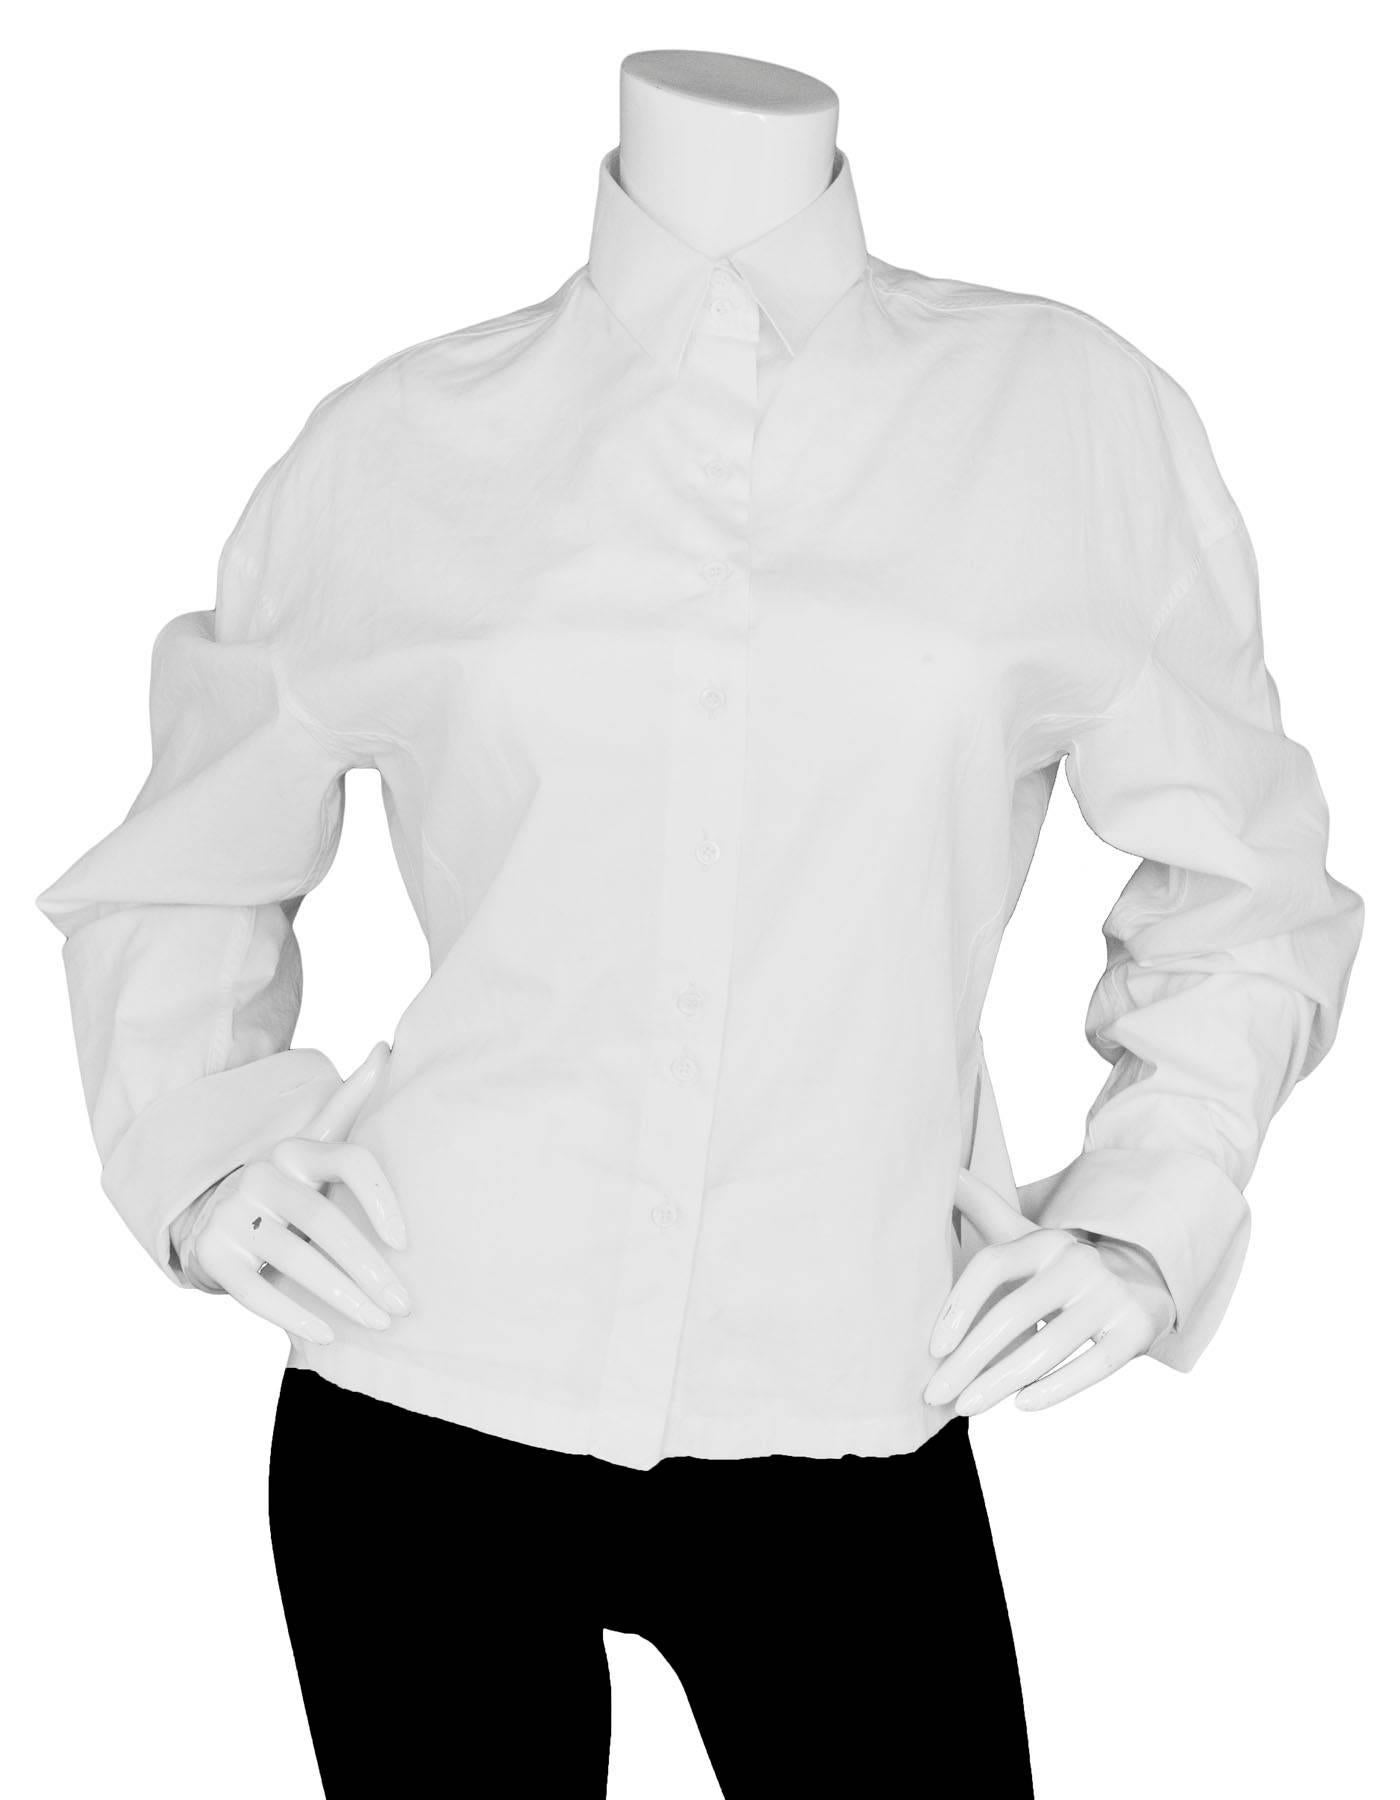 Alaia White Peplum Blouse Sz FR42

Made In: Italy
Color: White
Composition: 100% Cotton
Lining: None
Closure/Opening: Front button closure
Exterior Pockets: None
Interior Pockets: None
Overall Condition: Very good pre-owned condition with the